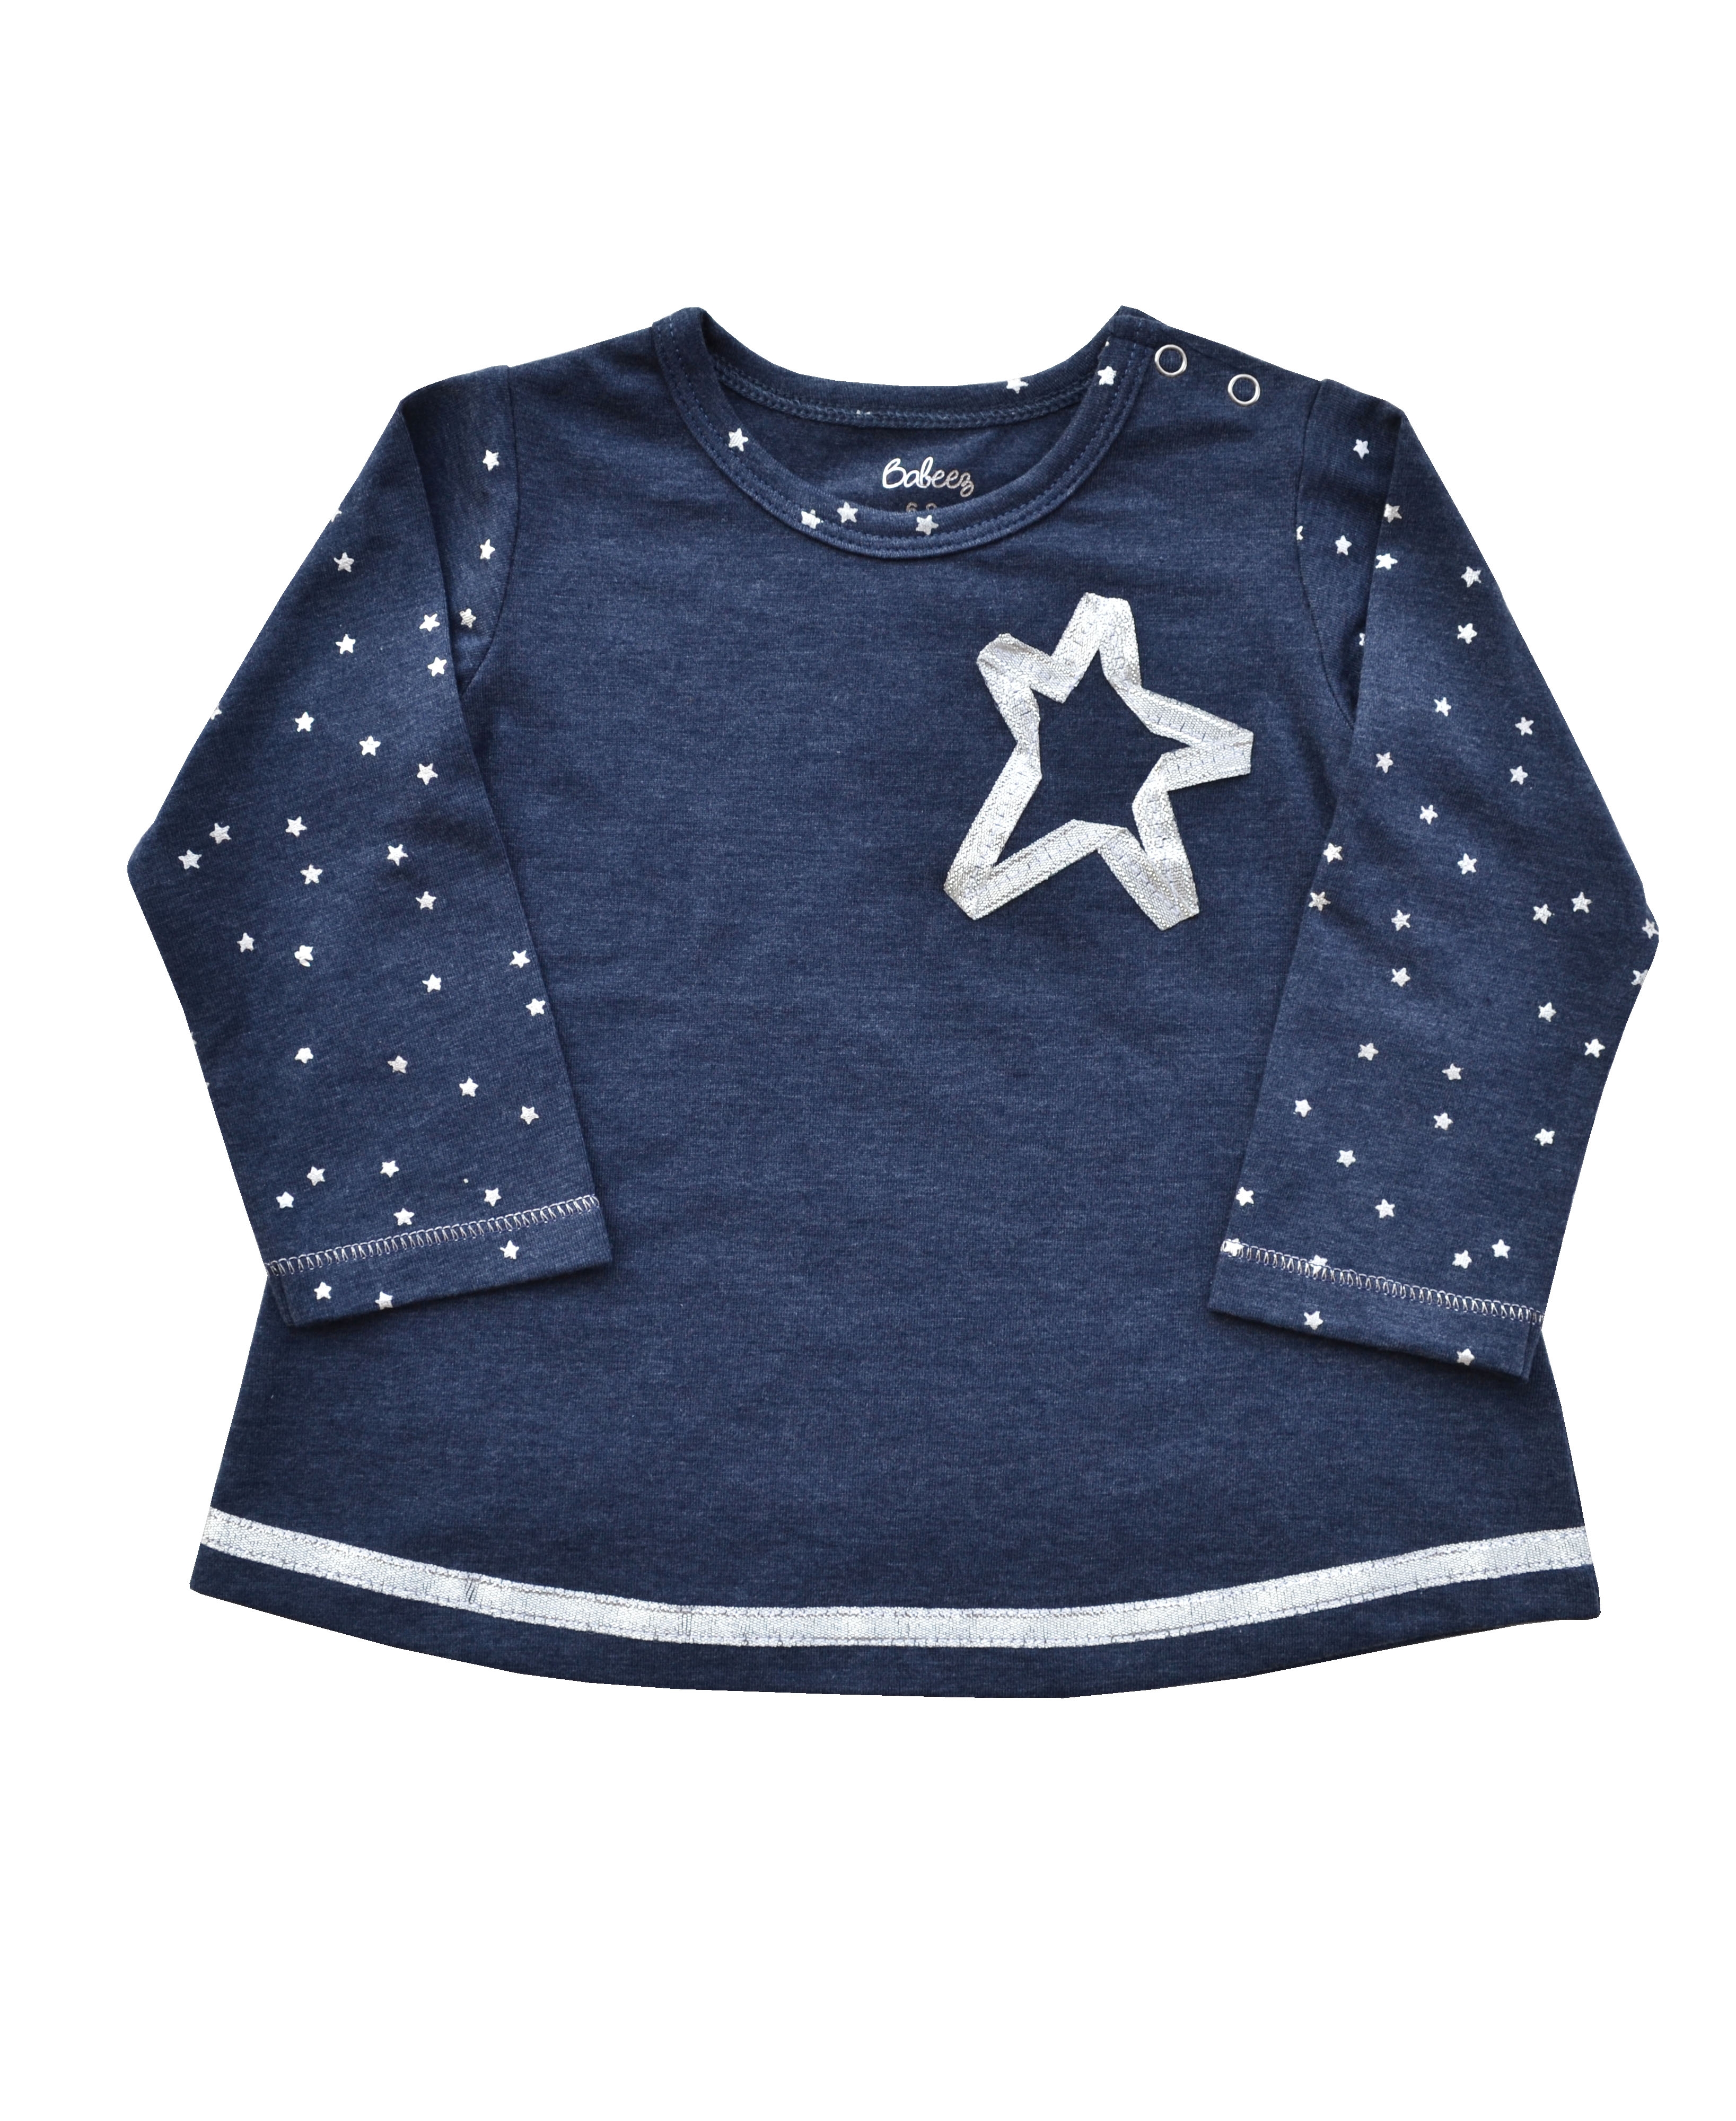 Silver Star Applique on Denim Blue Long Sleeves Top (60% Cotton 35% Polyester 5% Elasthan)